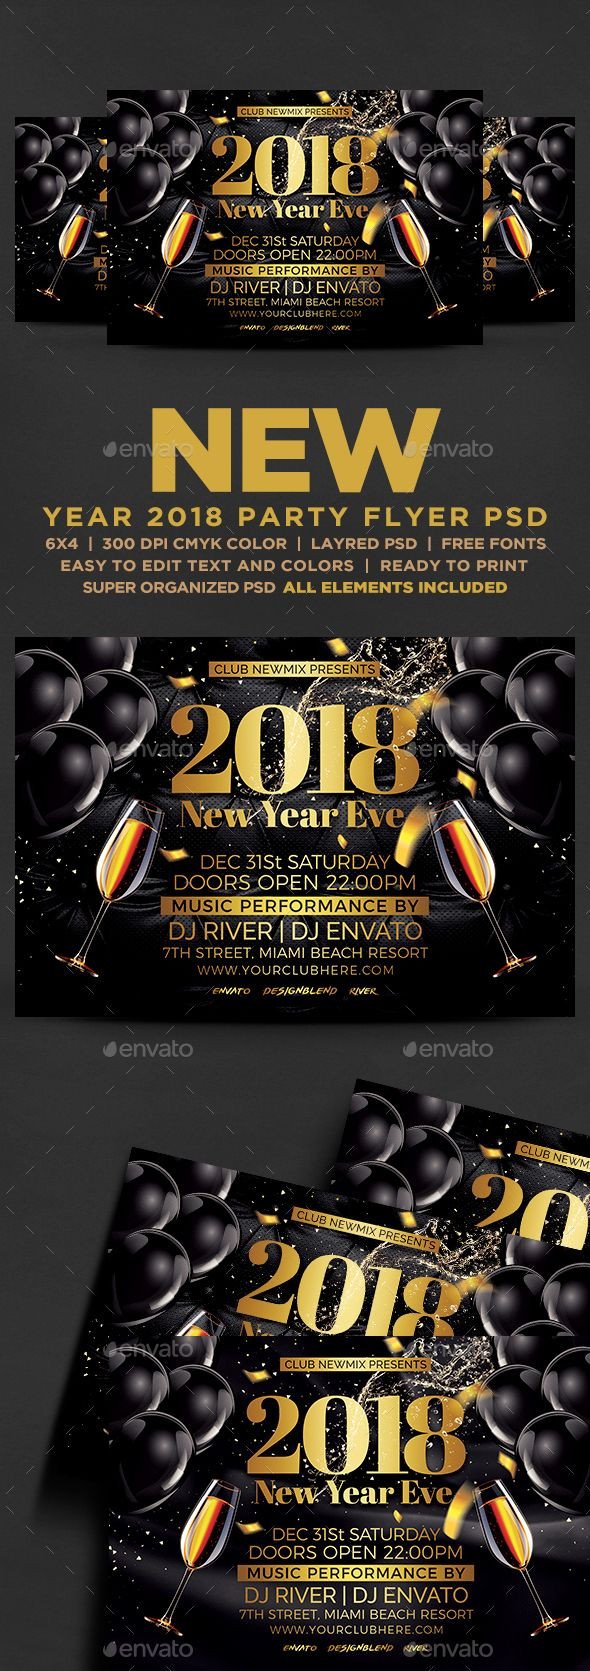 2018 New Year Eve Flyer Events Flyers